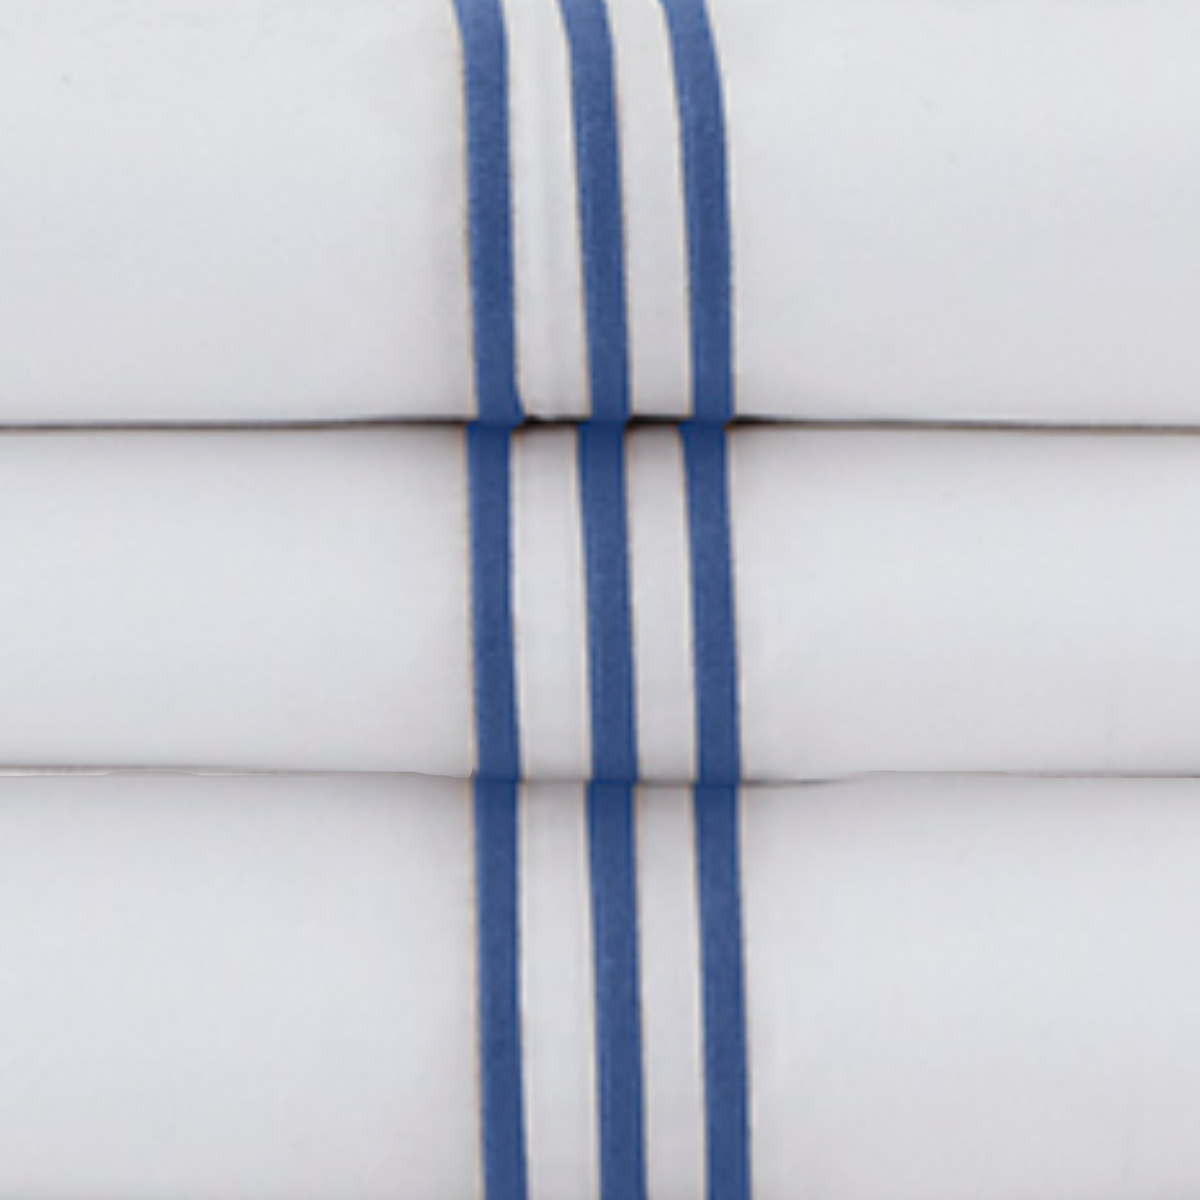 Swatch Sample of Downtown Company Madison Bedding Collection in Blue Color